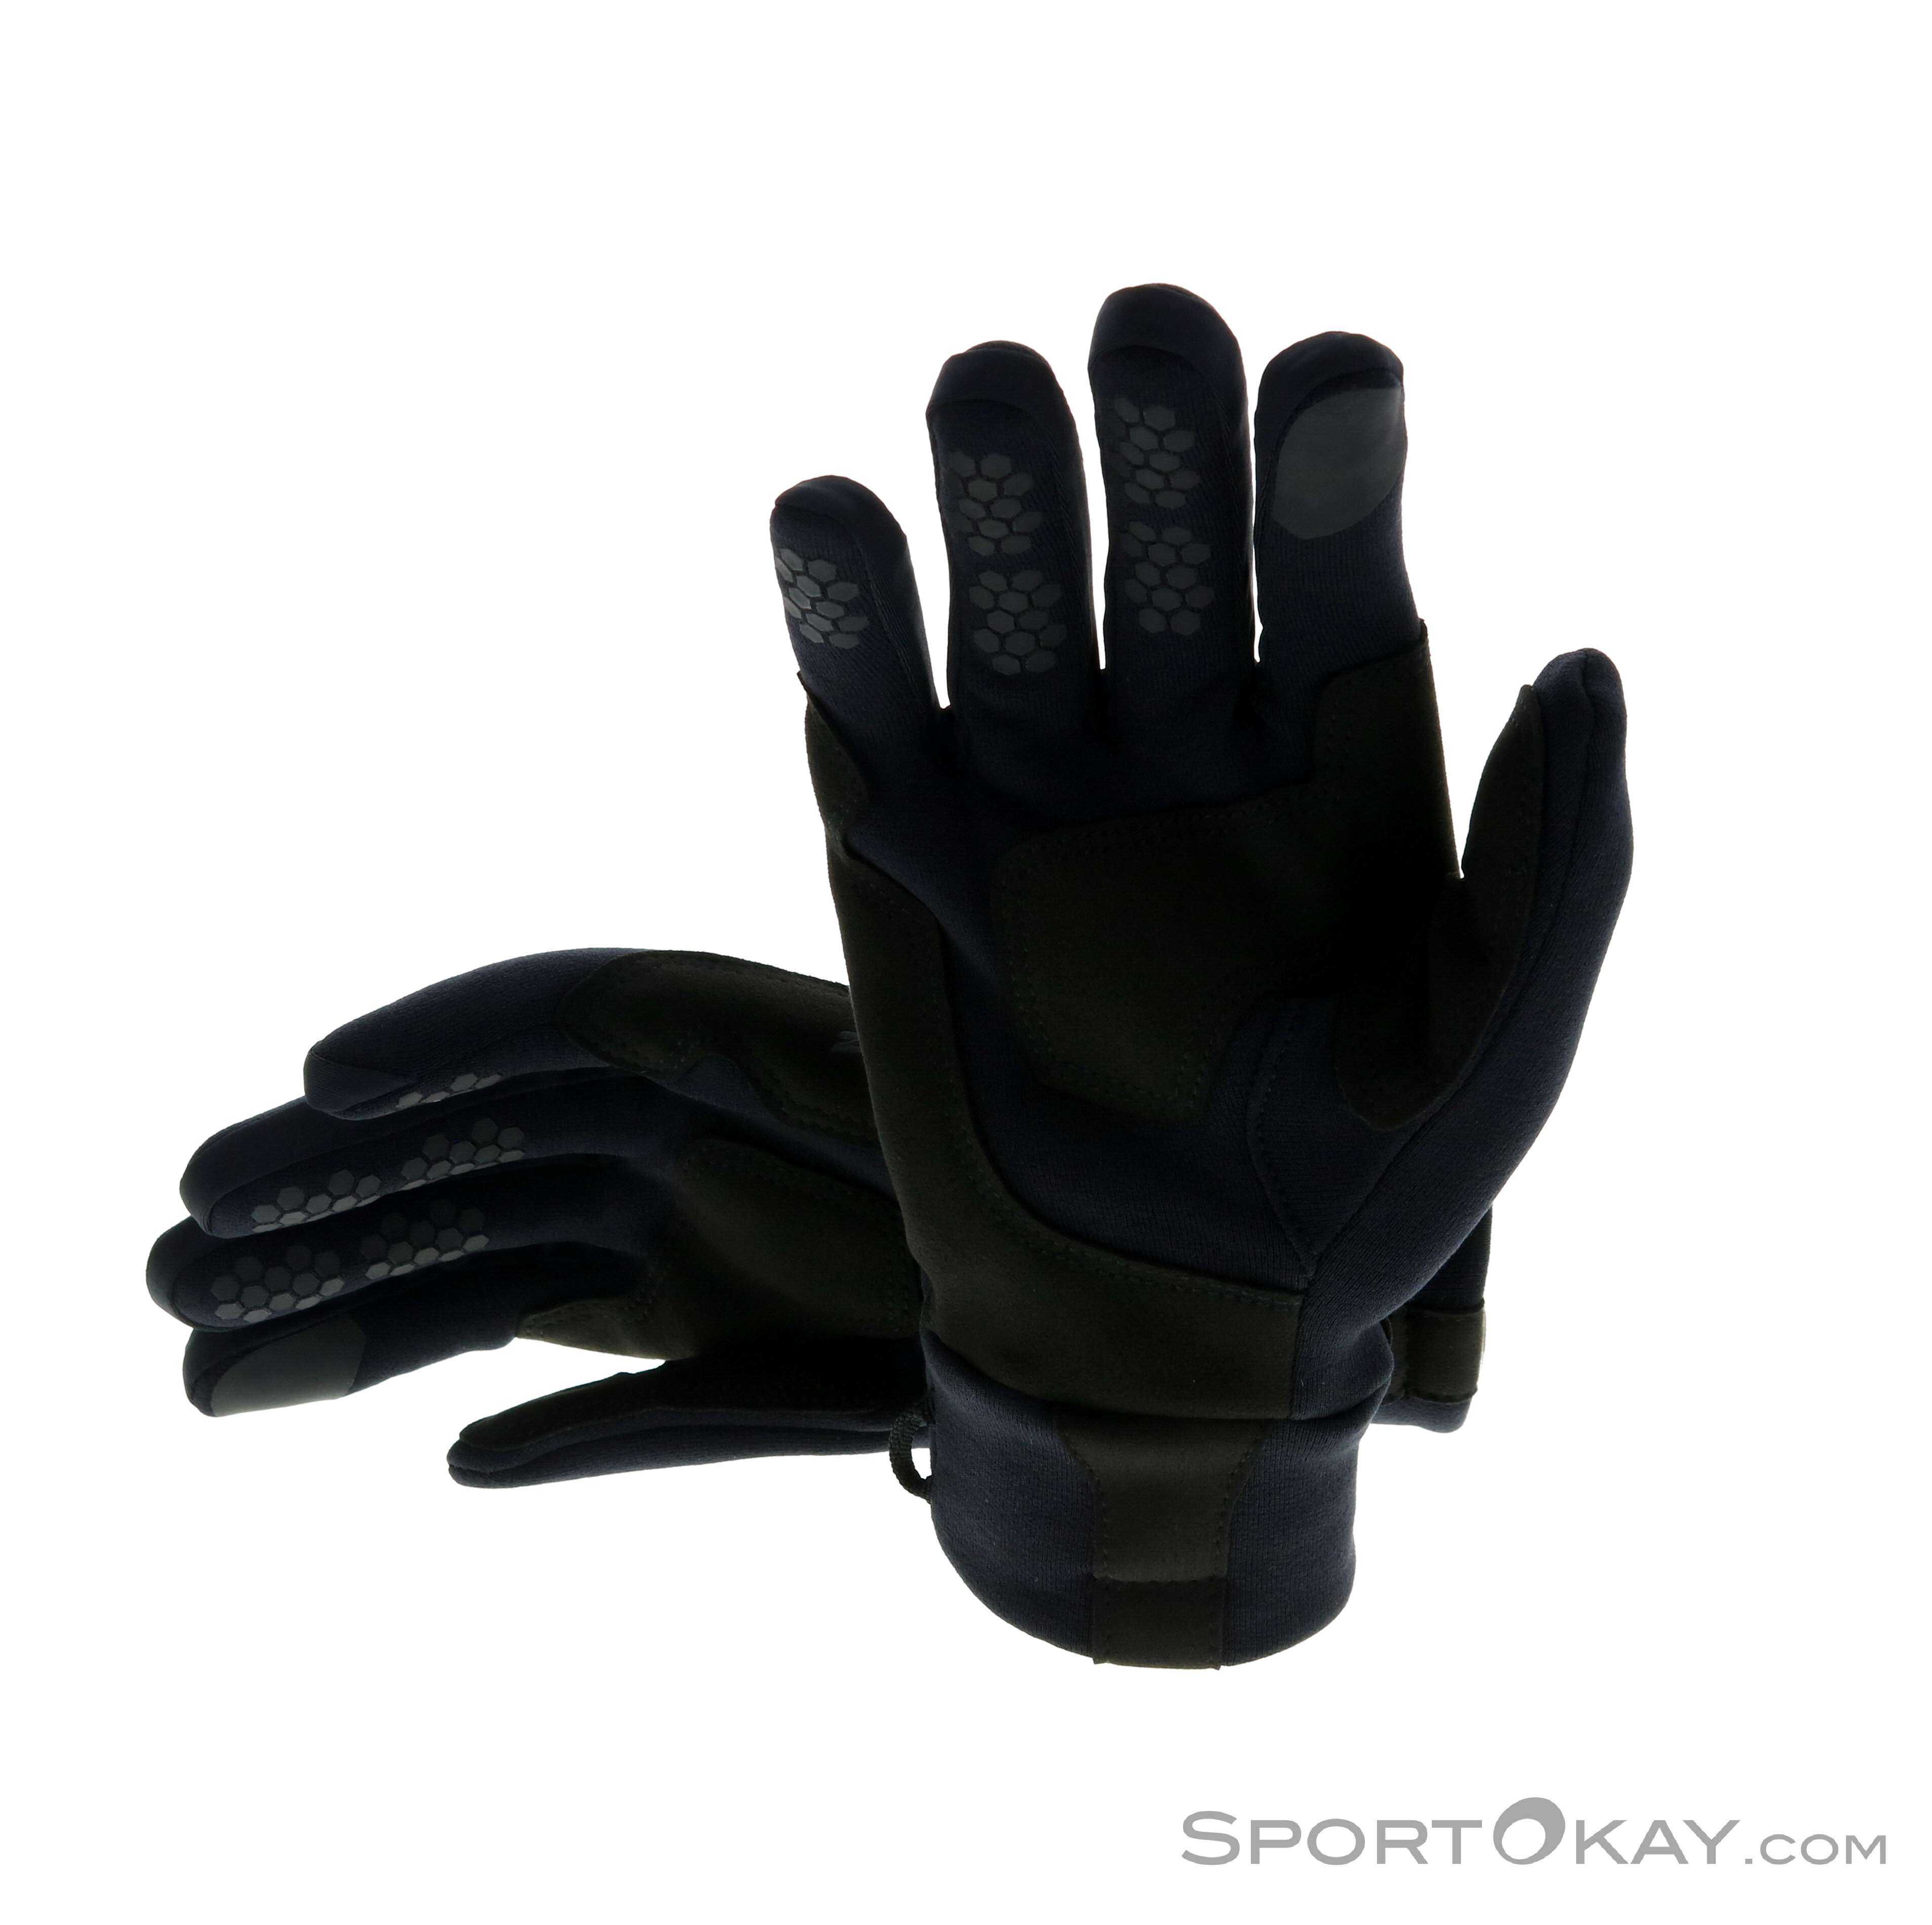 Ziener Gusty Touch Gloves - Gloves - Outdoor Clothing - Outdoor - All | Trainingshandschuhe